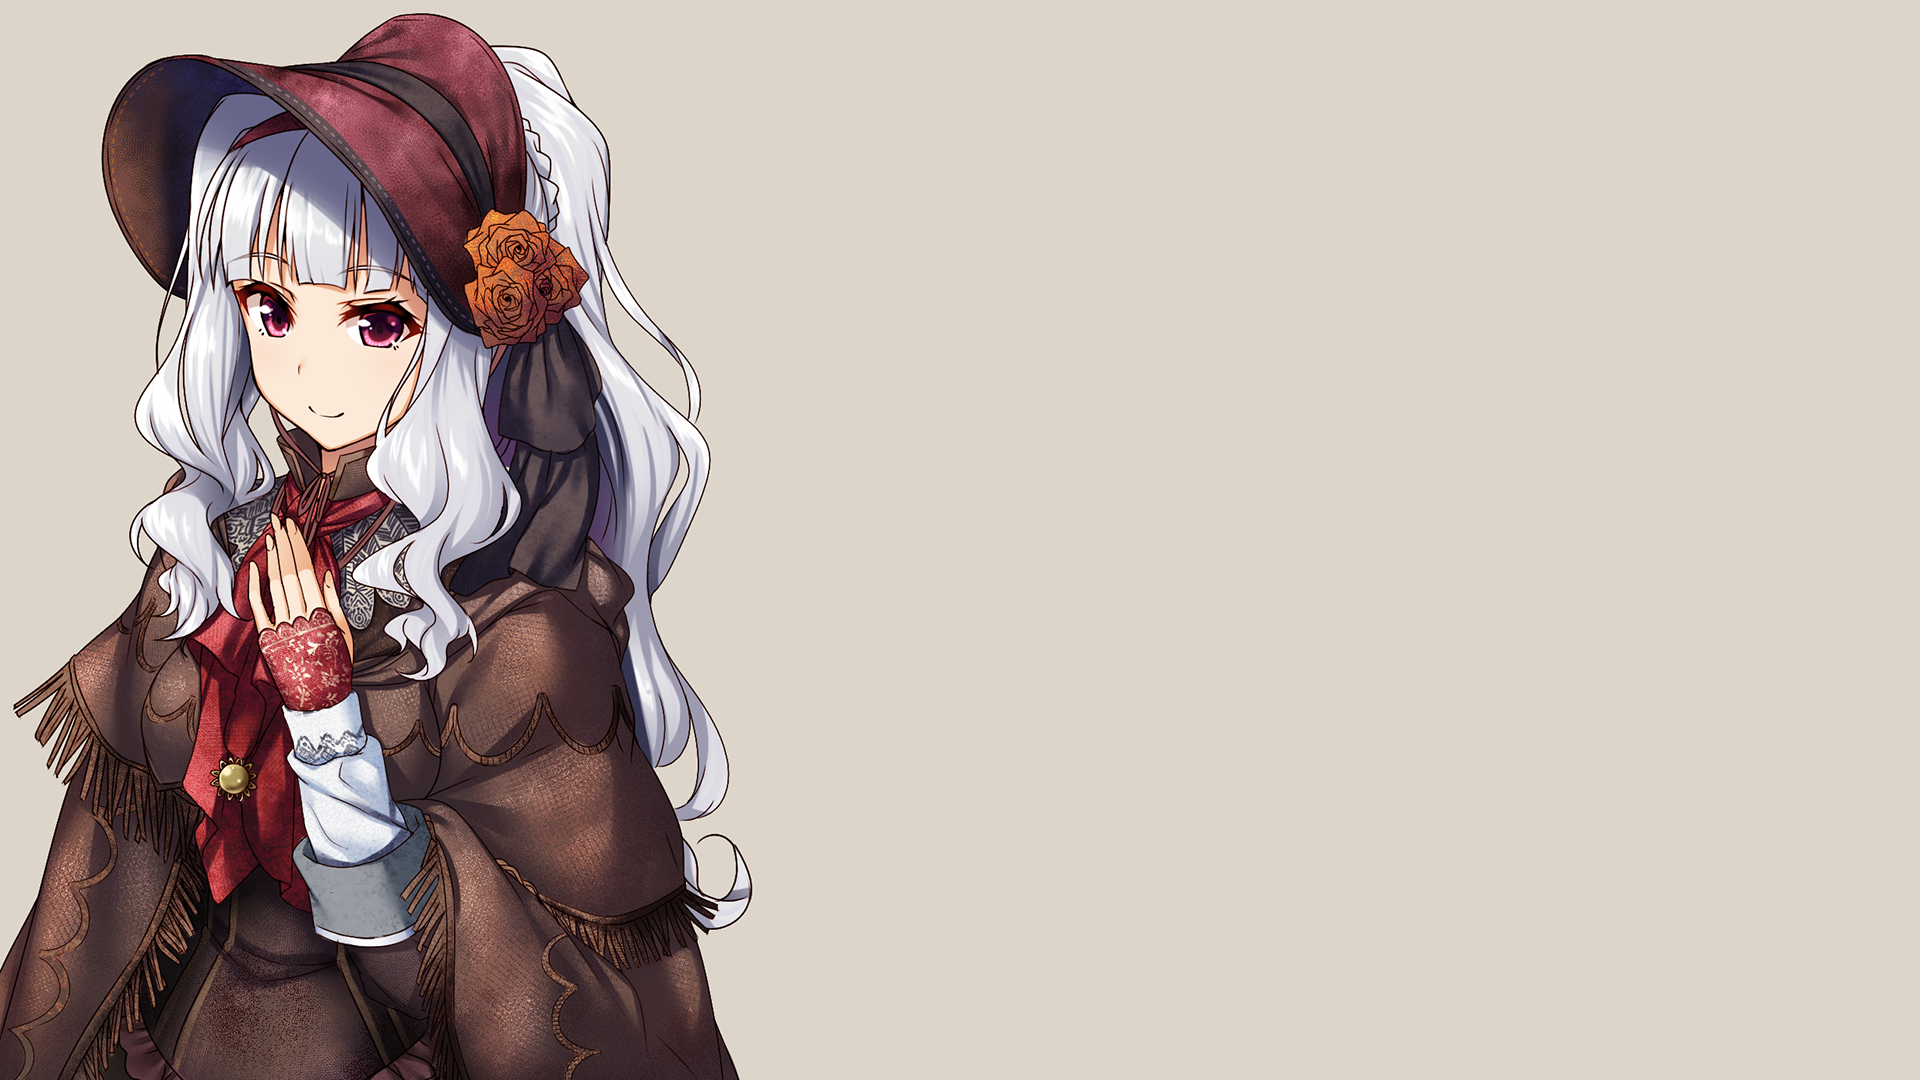 Anime 1920x1080 anime anime girls simple background gray background Shijou Takane THE iDOLM@STER crossover Bloodborne ascot bonnet dress cape gauntlets lolita fashion long hair silver hair pink eyes